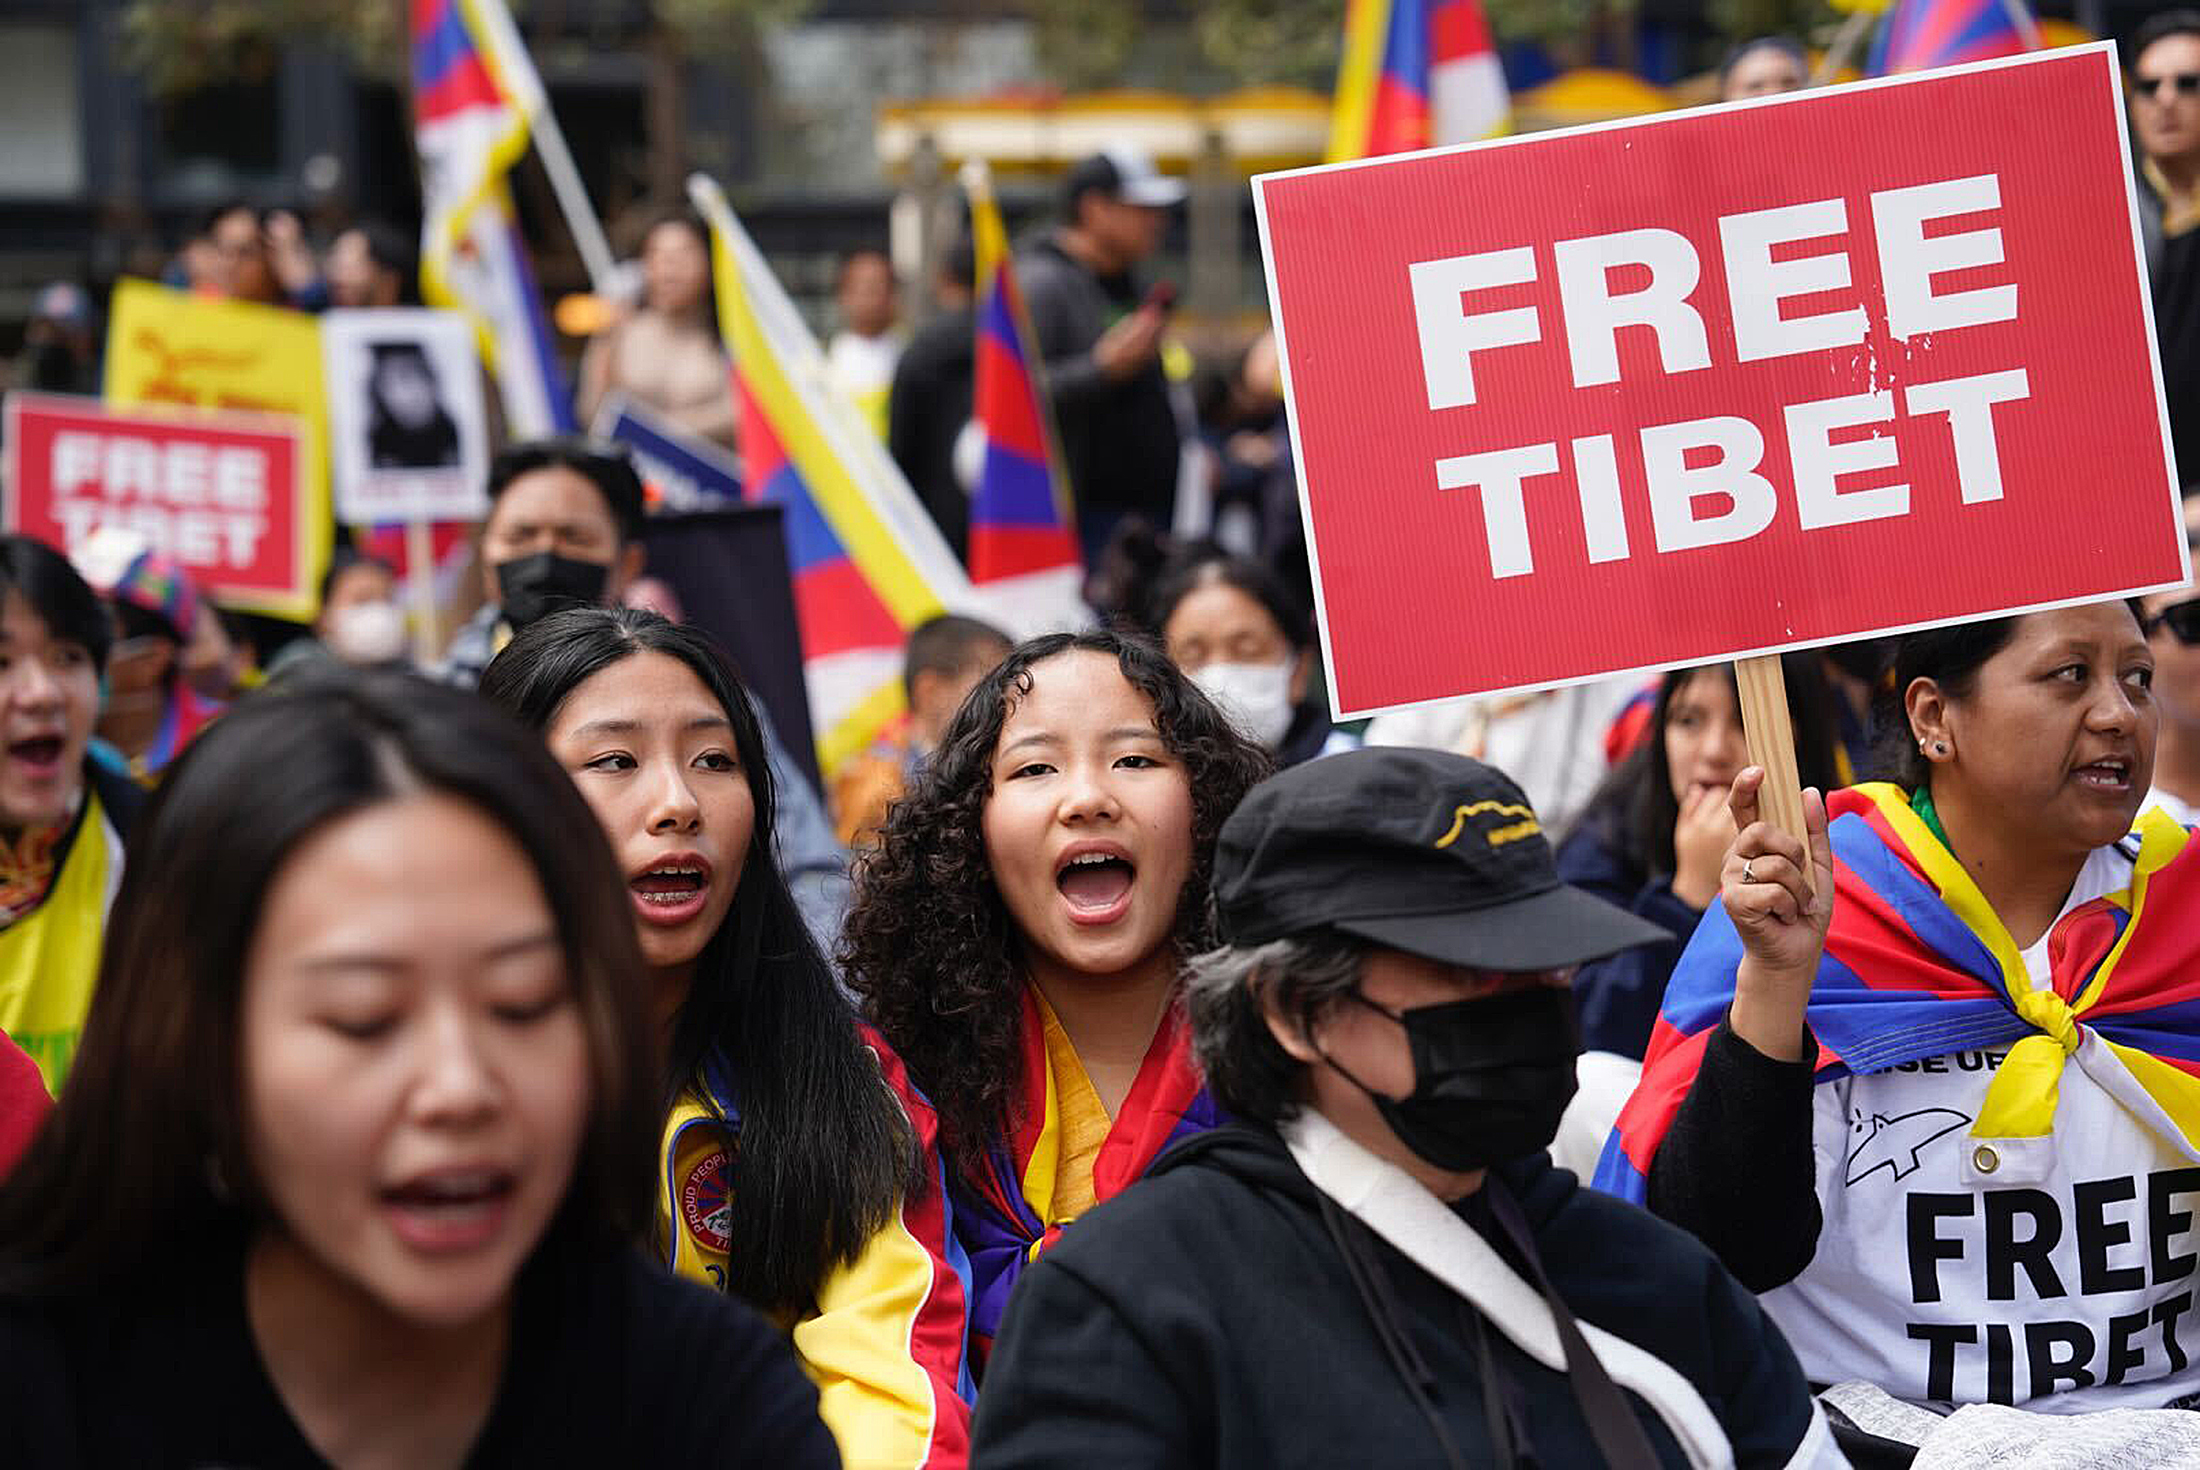 A person holds a sign that reads &quot;FREE TIBET&quot; during a large protest of pro-Tibet demonstrators who are holding Tibetan flags.